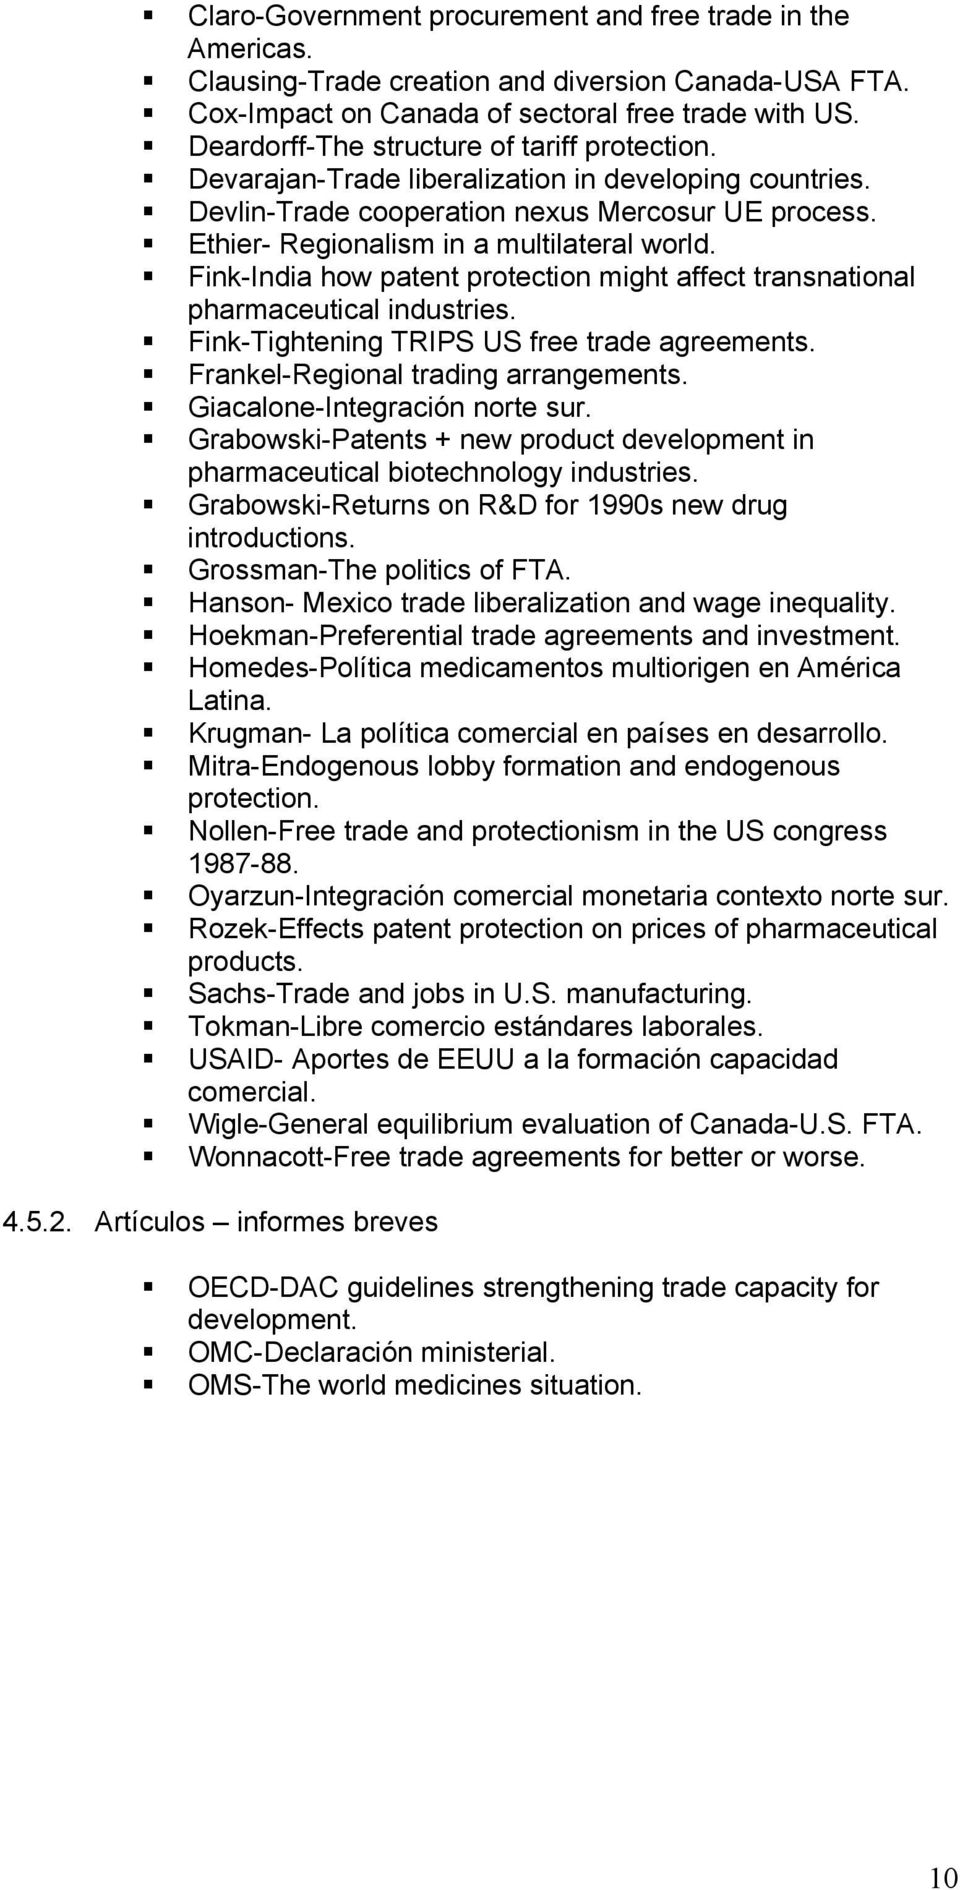 Fink-India how patent protection might affect transnational pharmaceutical industries. Fink-Tightening TRIPS US free trade agreements. Frankel-Regional trading arrangements.